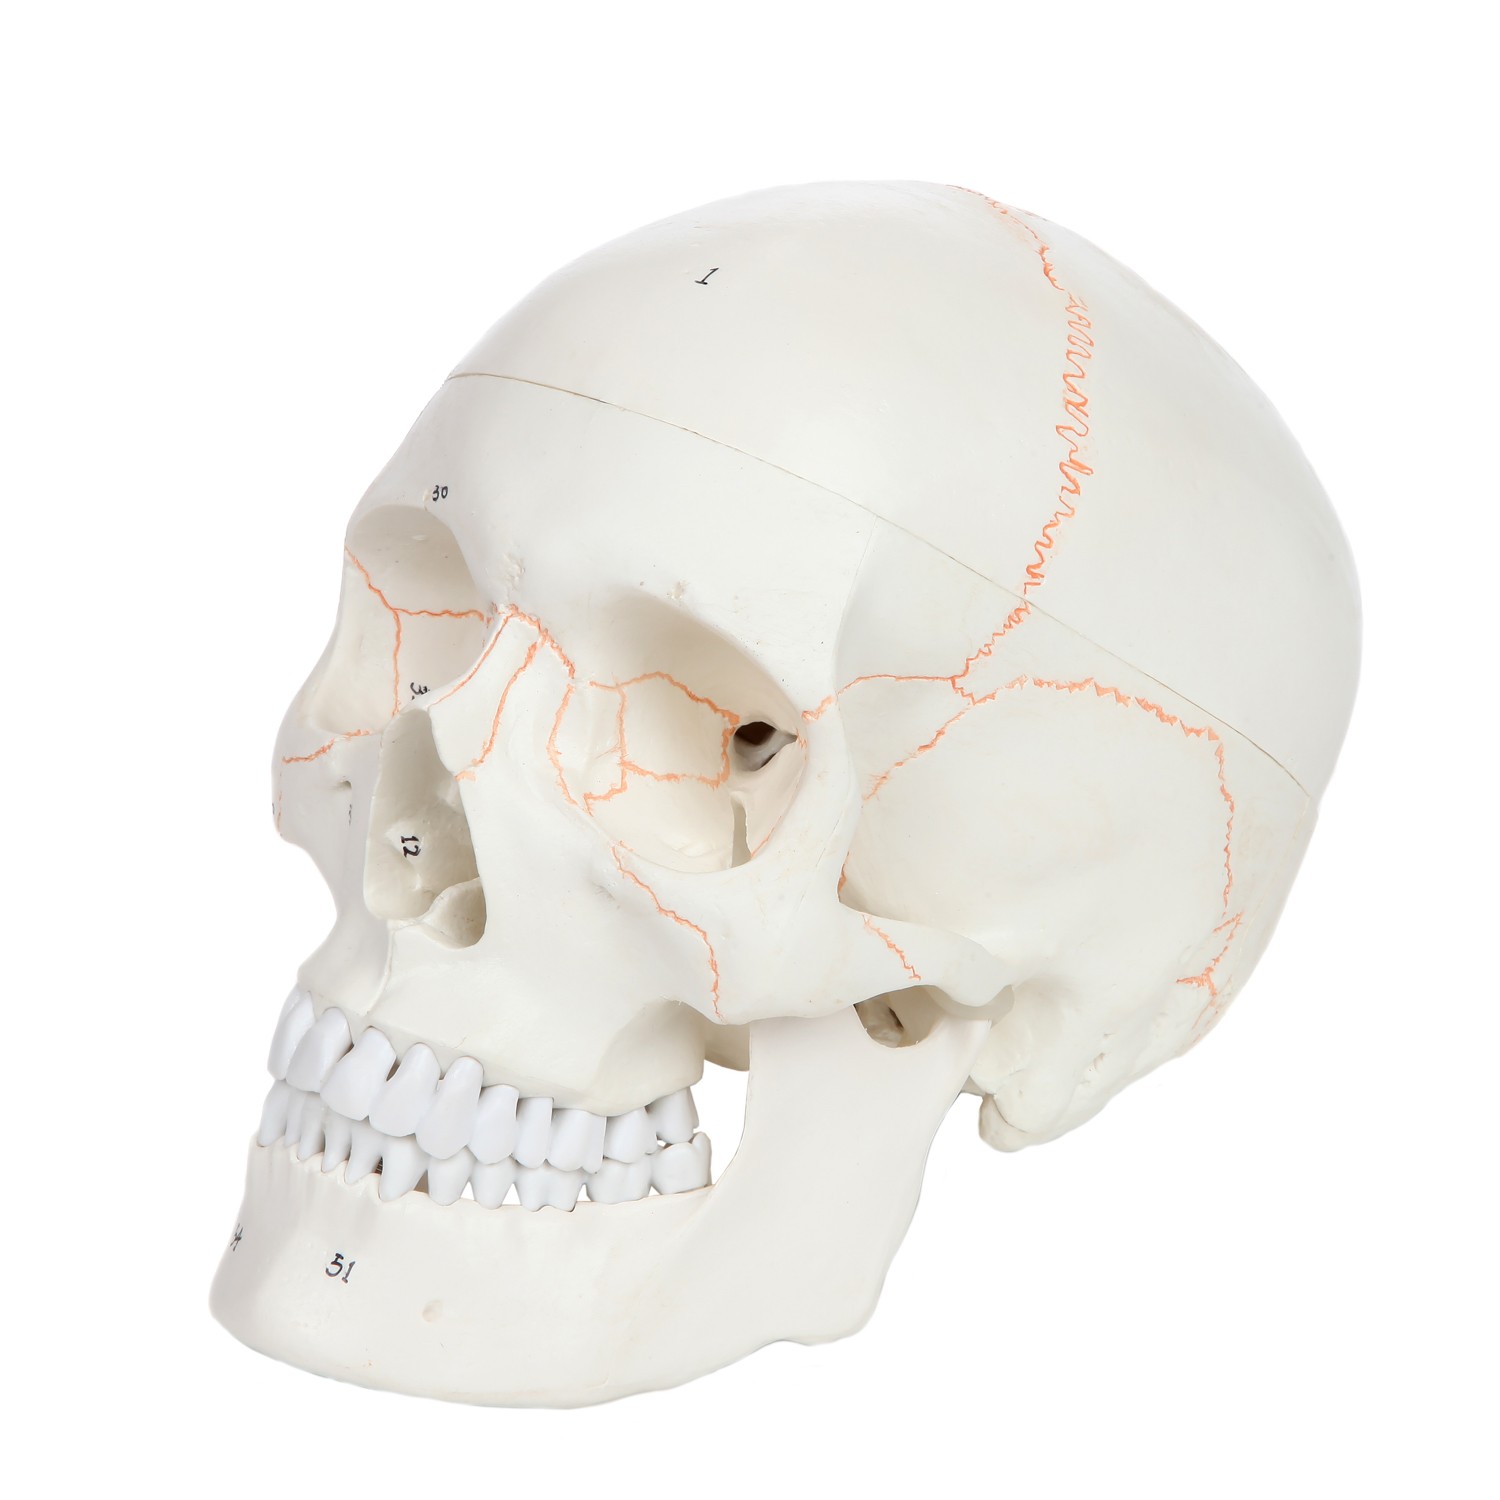 Anatomy Skull Numbered Axis Scientific